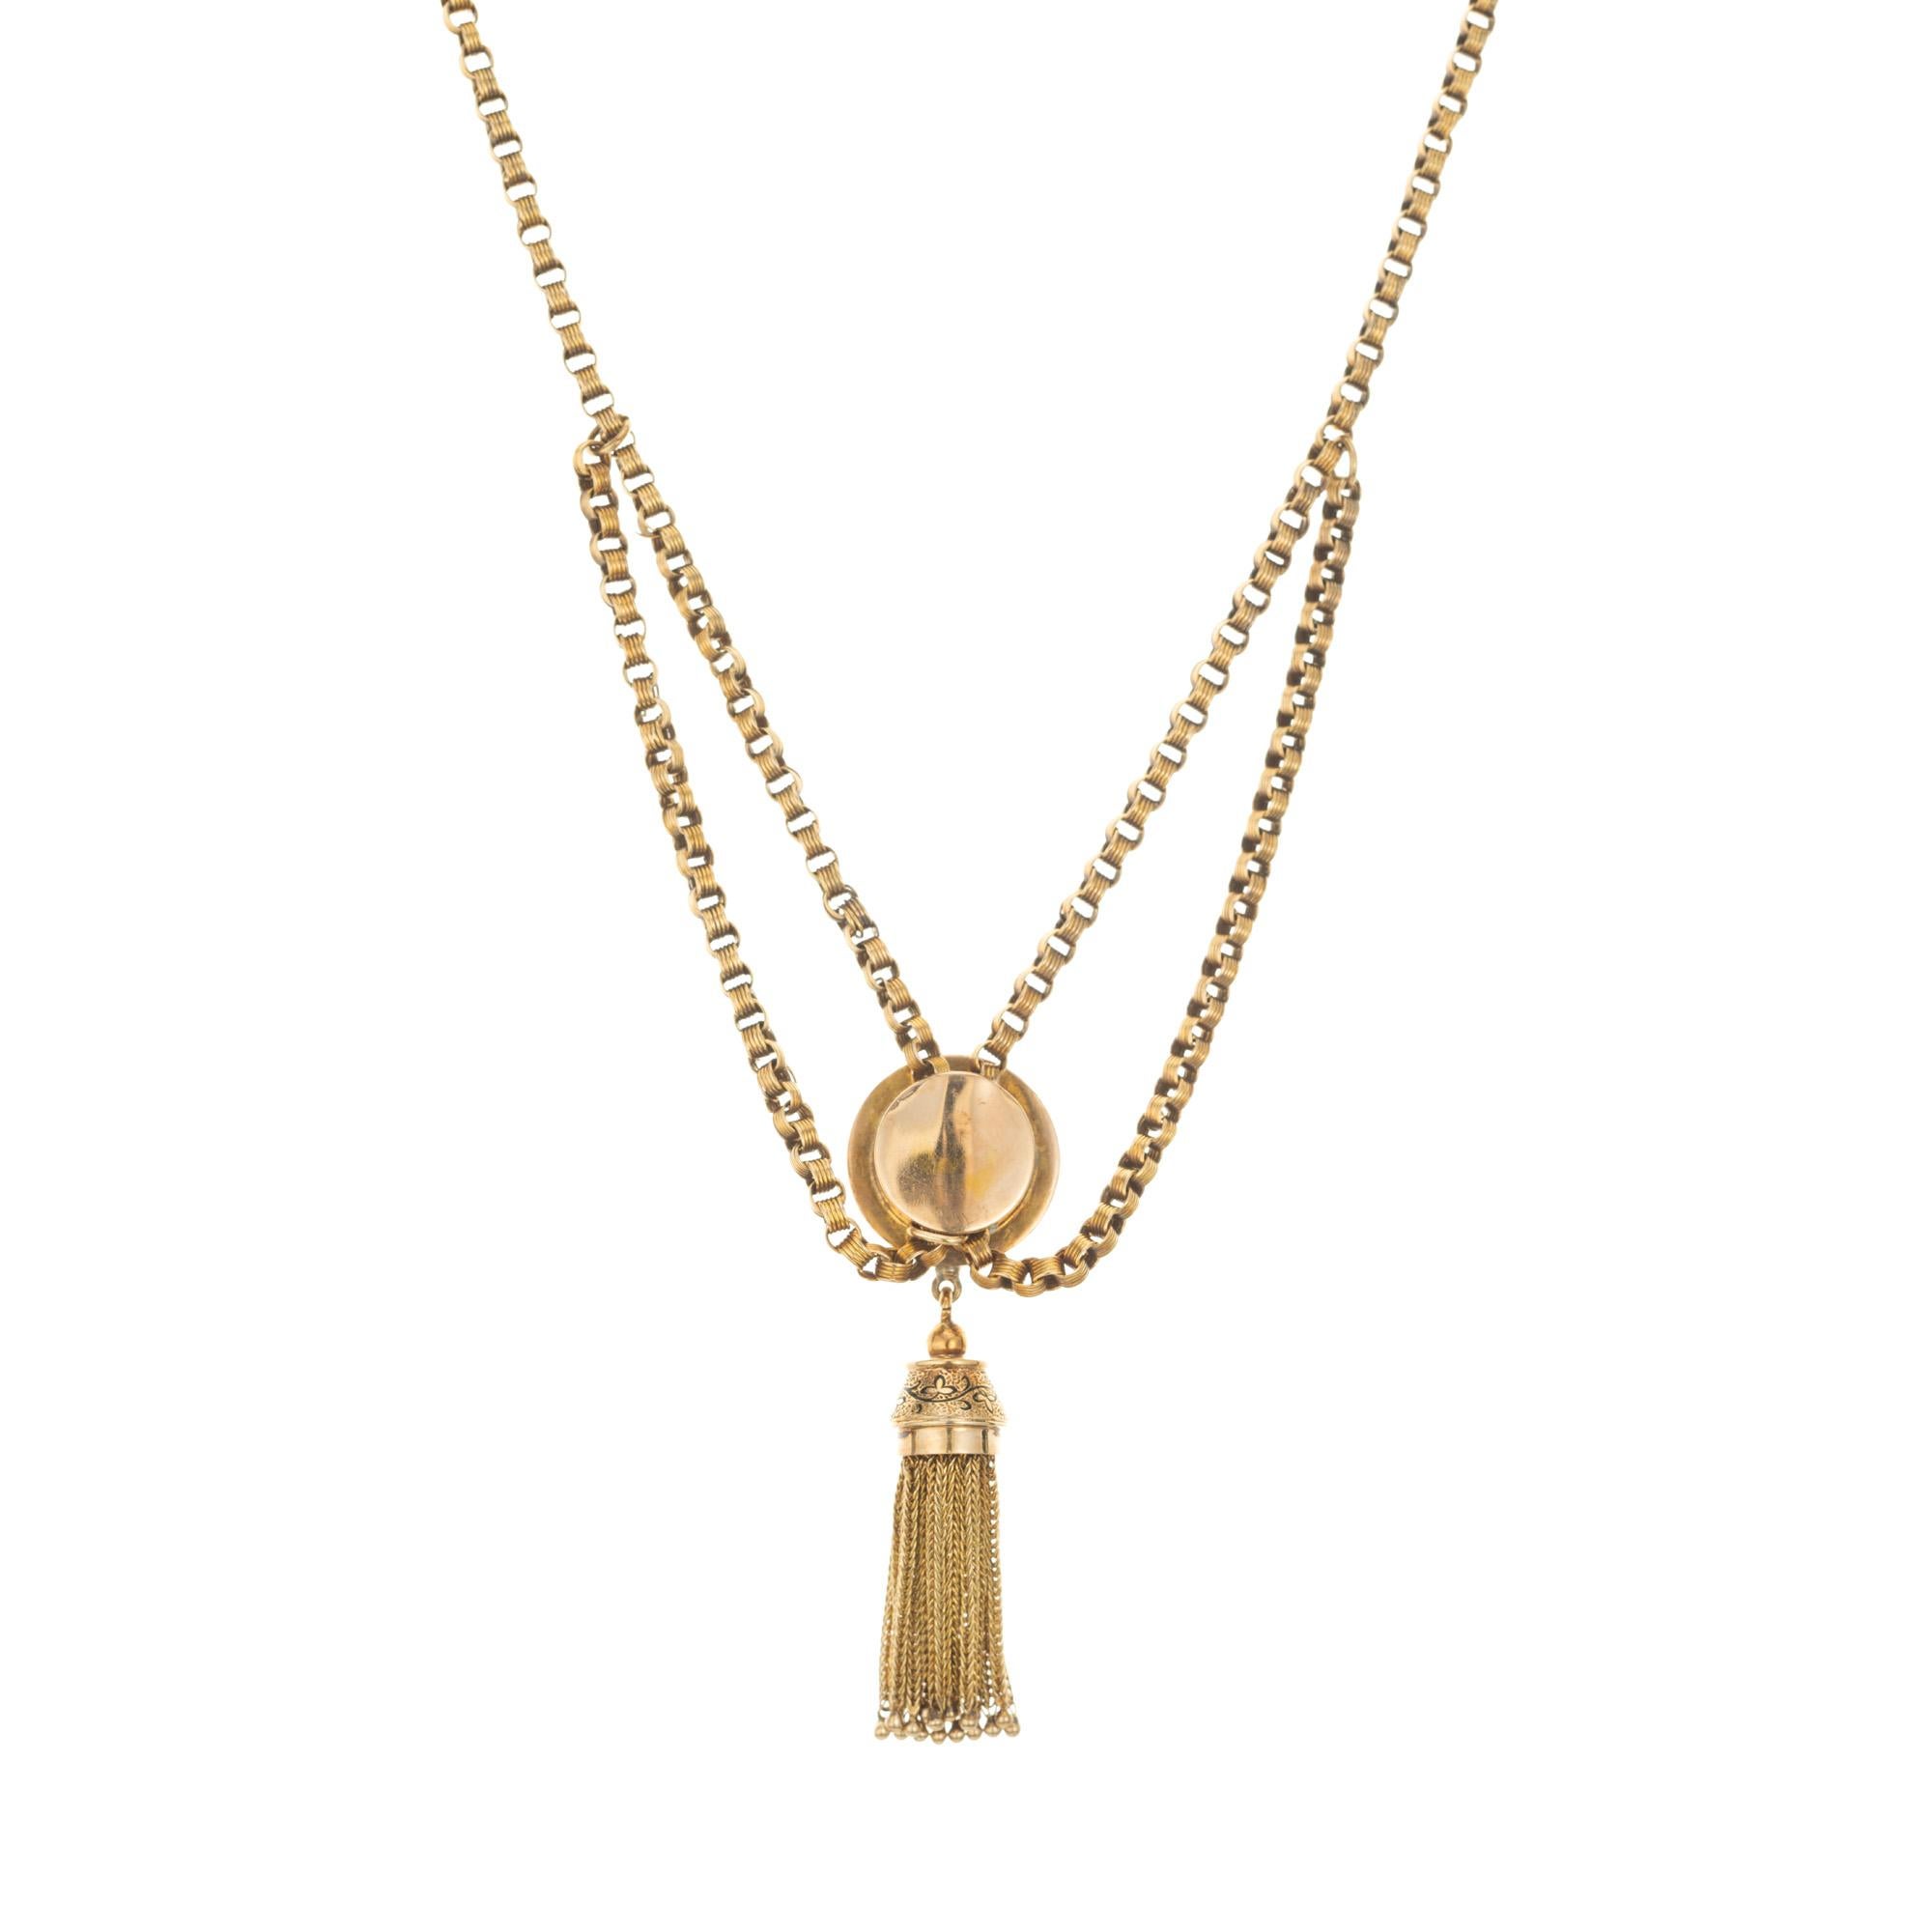 1860's Victorian gold tassel engraved pendant necklace. Crafted with meticulous attention to detail, this pendant features intricate engravings, reminiscent of the ornate designs from the Victorian era, creating a captivating and sophisticated look.